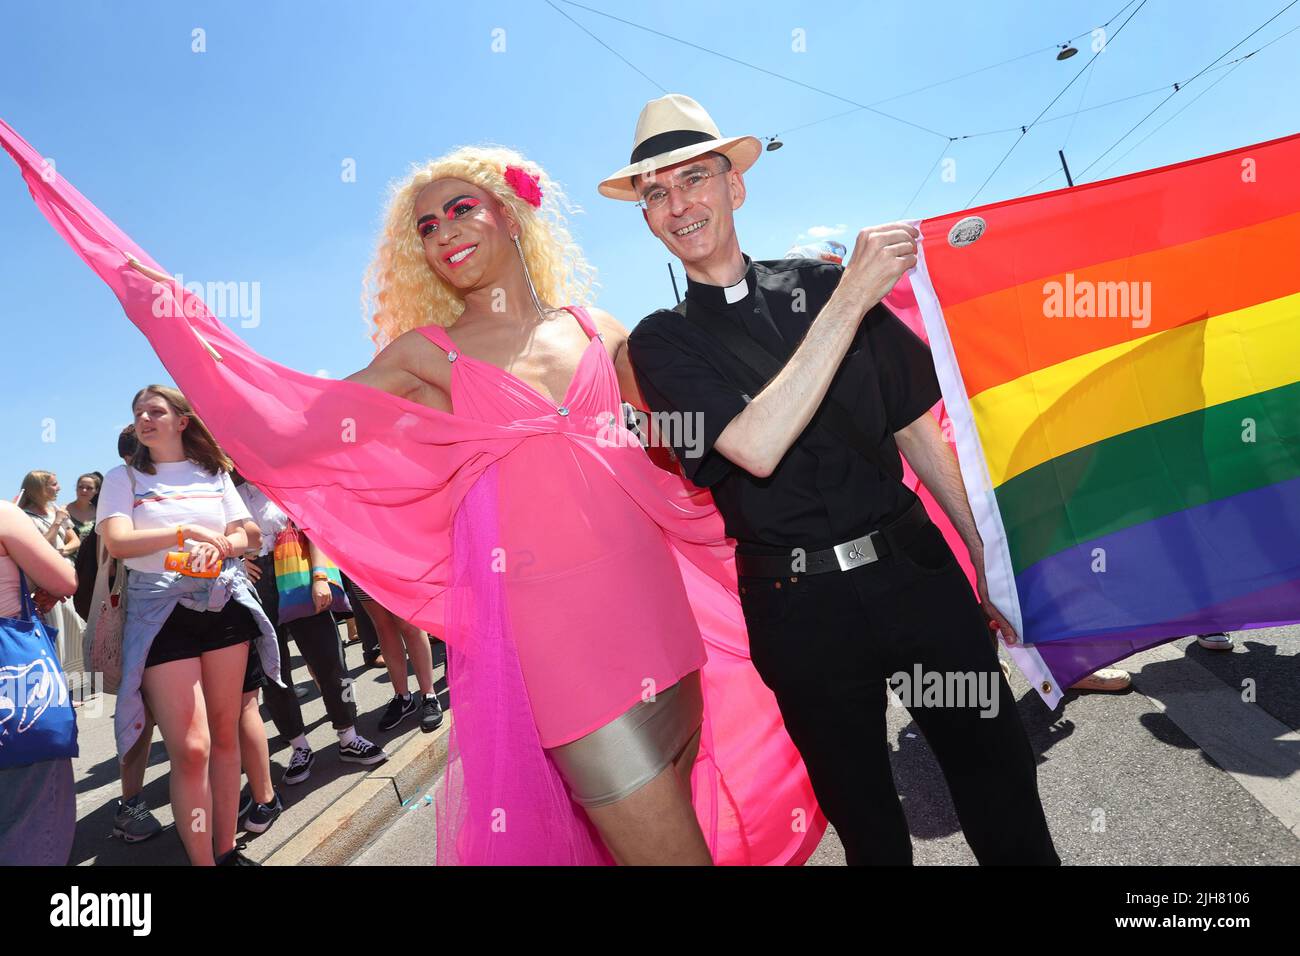 Munich, Germany. 16th July, 2022. Wolfgang Rothe, Catholic priest (r), takes part in the Christopher Street Day (CSD) parade in the city center. Catholic priest Wolfgang Rothe wants to set an example with an appearance at this year's CSD parade in Munich. The CSD motto is 'Less me, more we.' The CSD is intended to remind people of the rights of lesbians, gays, bisexuals, transgender, intersex and queer people. Credit: Karl-Josef Hildenbrand/dpa/Alamy Live News Stock Photo